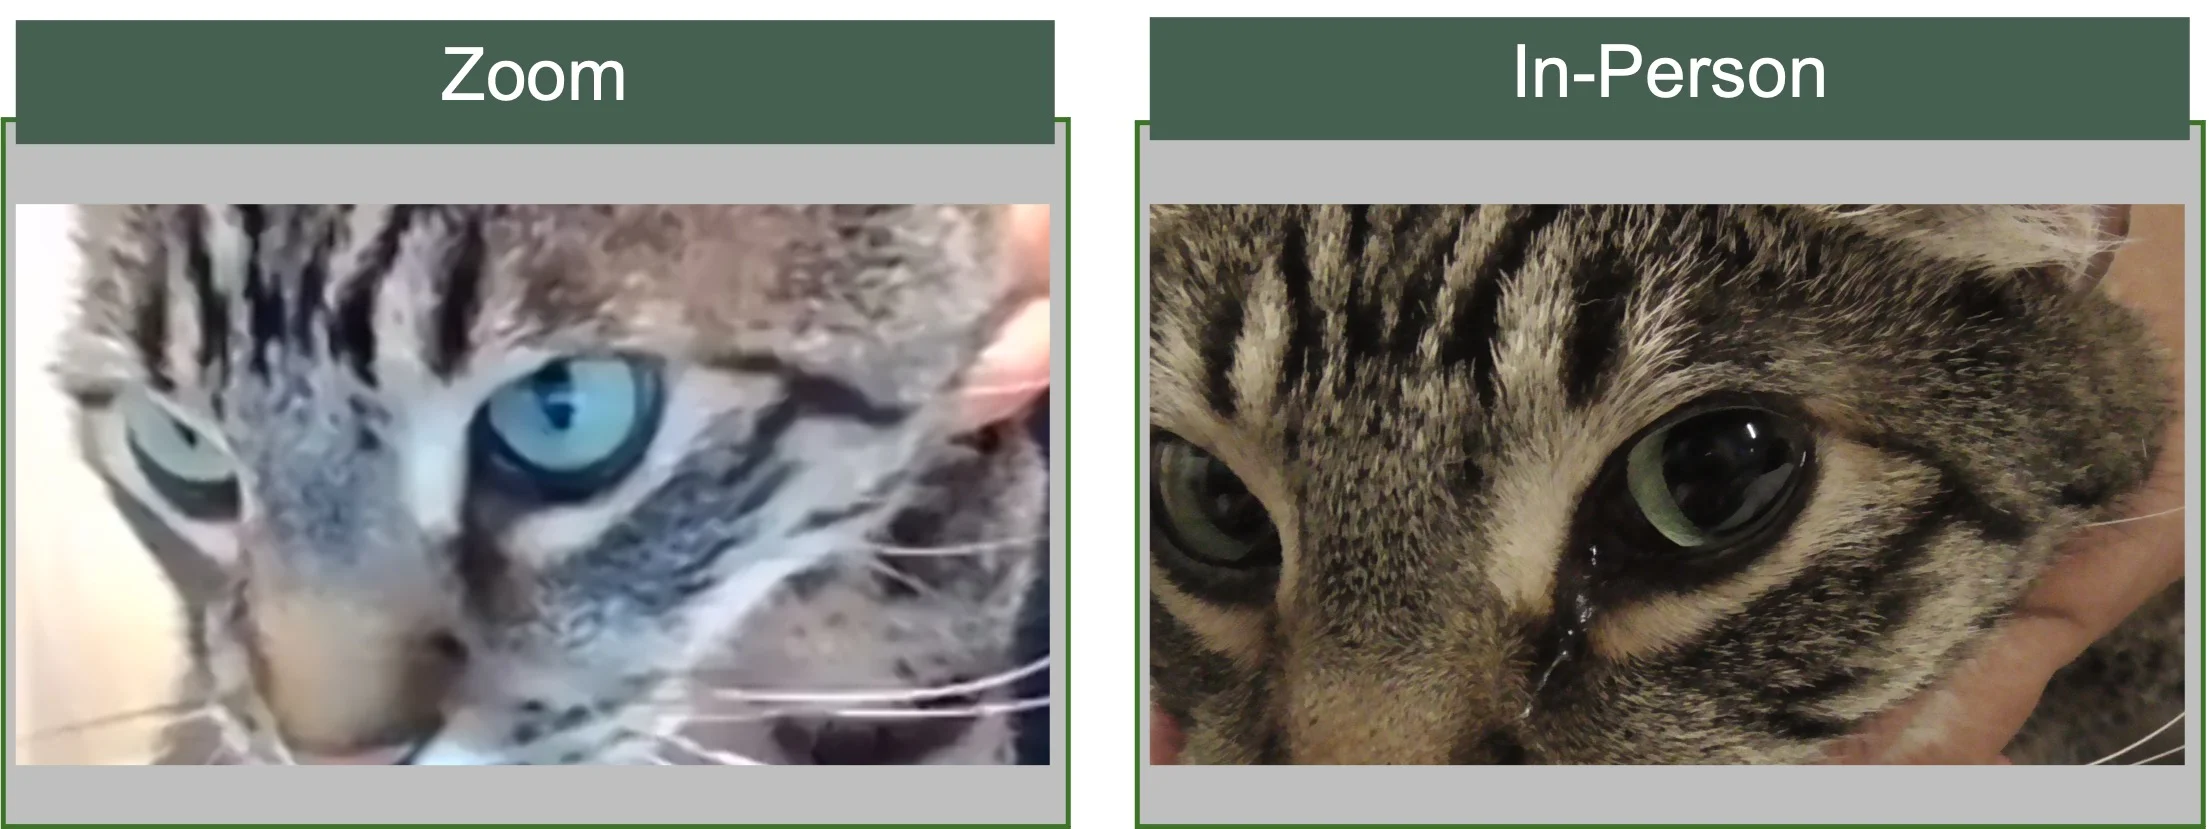 Side by side close-up photos of the eyes of a cat being medically evaluated over Zoom compared with in-person.